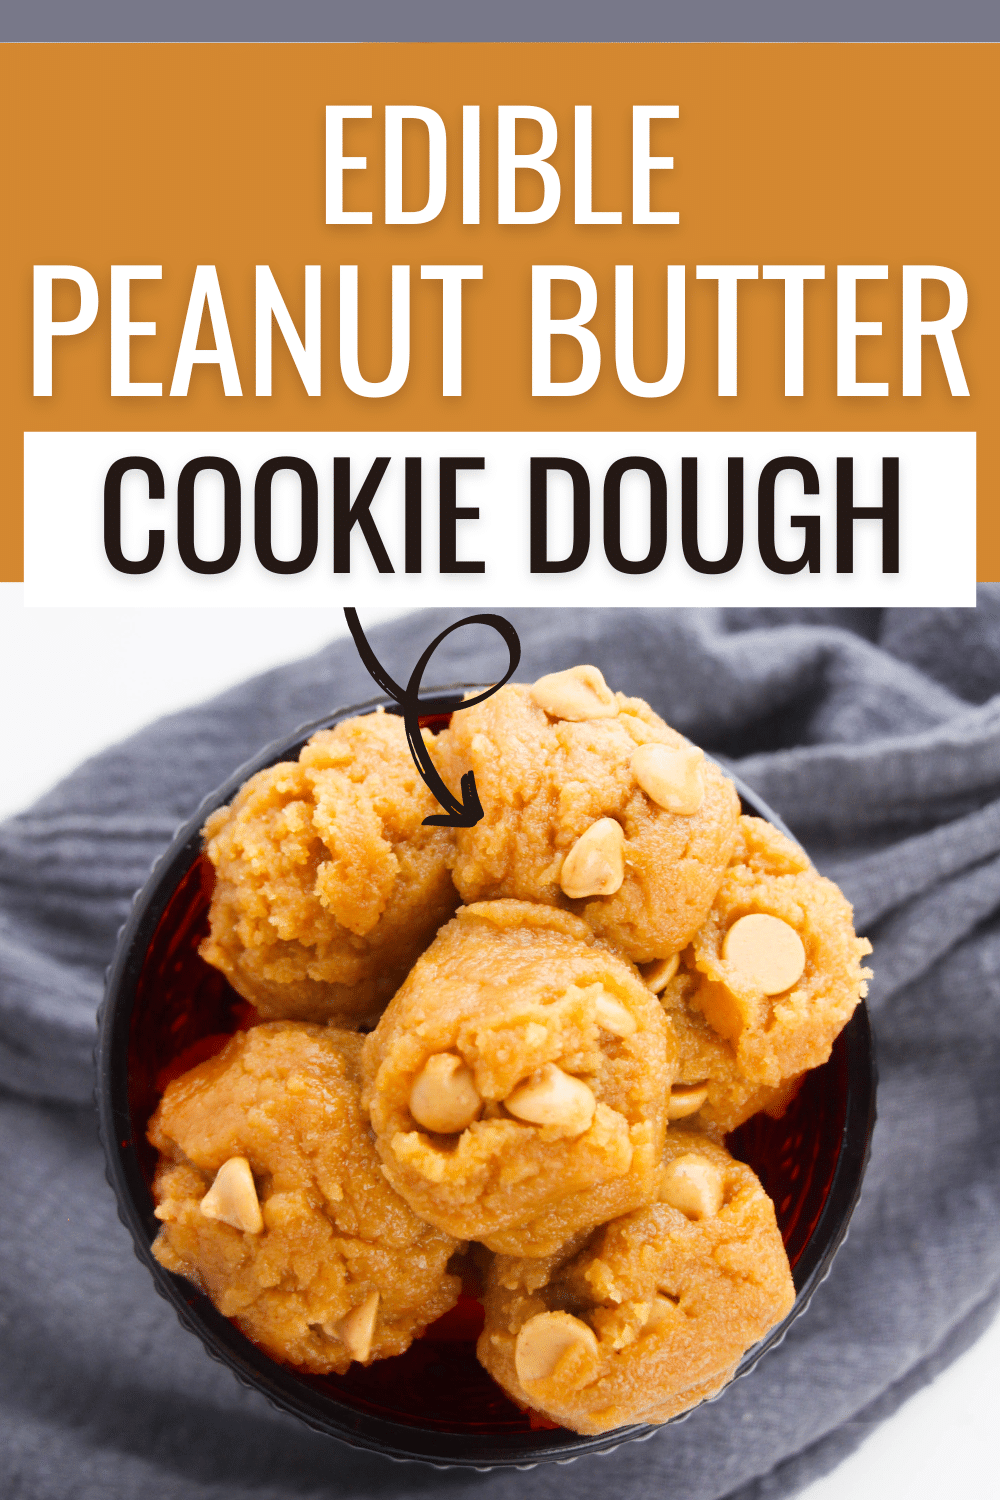 Bring back the nostalgic flavors of your childhood memories through this delightful Edible Peanut Butter Cookie Dough recipe. #ediblepeanutbuttercookiedough #cookies #ediblecookiedough #sweettooth #peanutbutterchips via @wondermomwannab